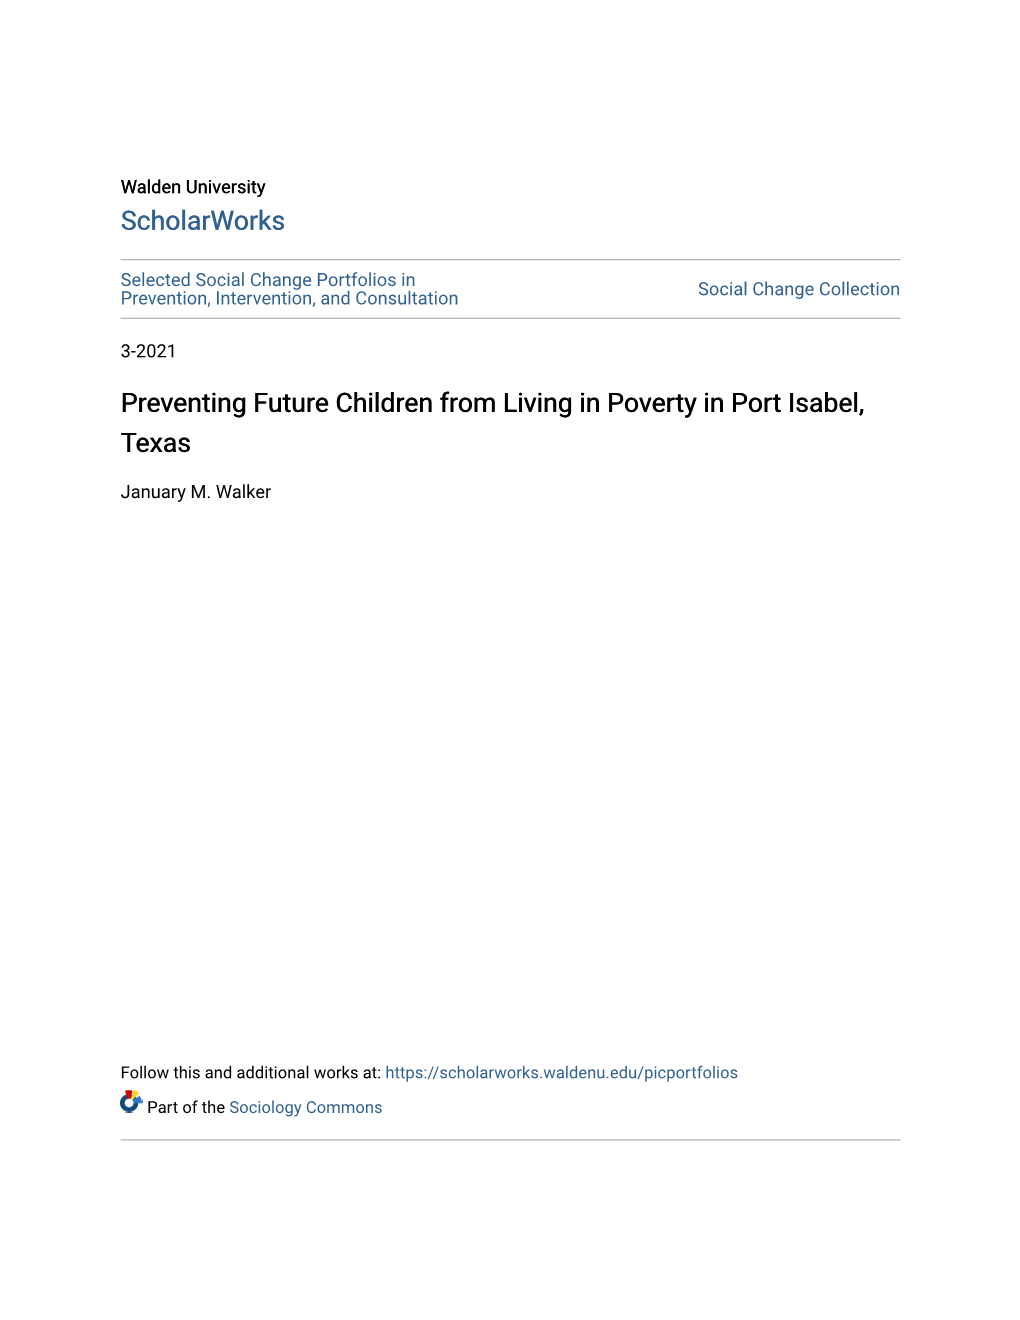 Preventing Future Children from Living in Poverty in Port Isabel, Texas